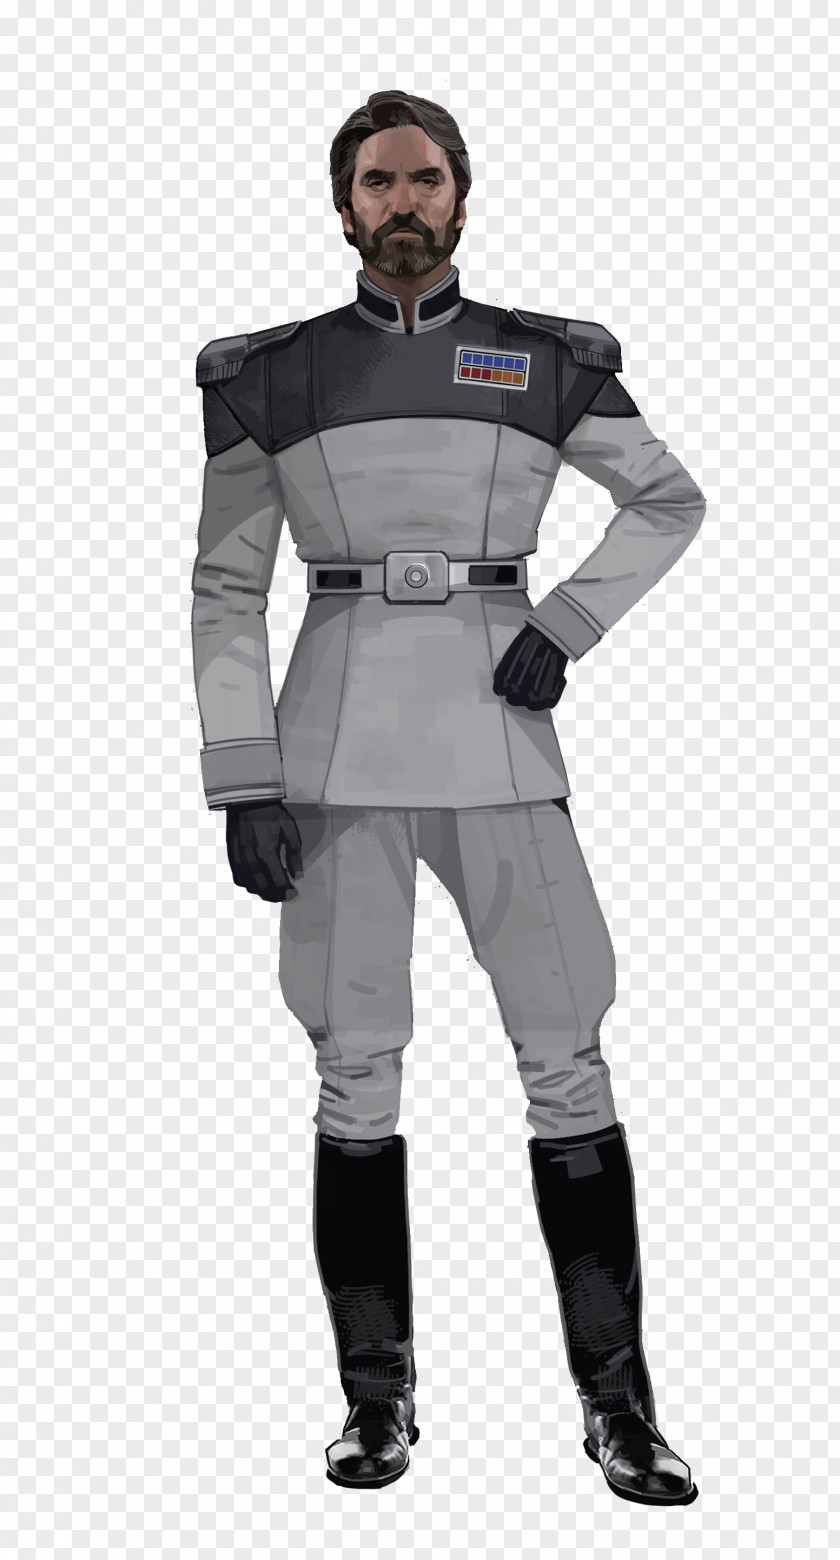 Navy Uniform Star Wars Roleplaying Game Stormtrooper Wars: The Last Jedi Role-playing PNG